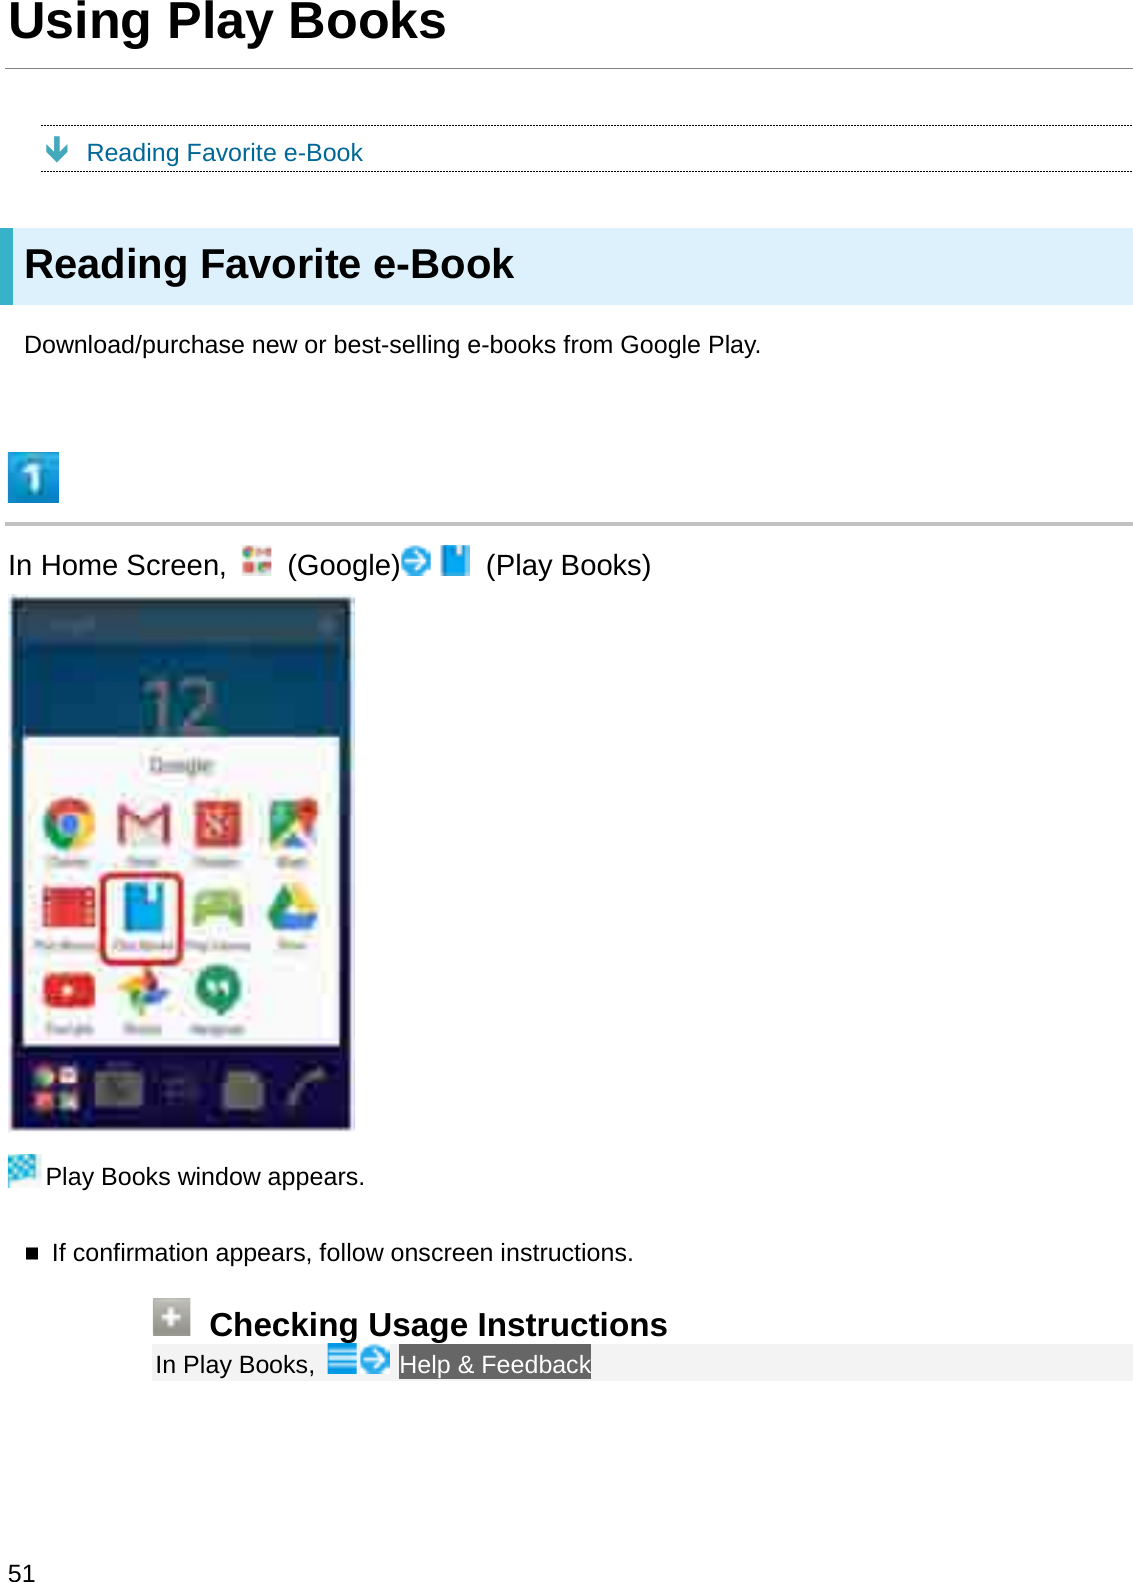 Using Play BooksÐReading Favorite e-BookReading Favorite e-BookDownload/purchase new or best-selling e-books from Google Play.In Home Screen,  (Google) (Play Books)Play Books window appears.If confirmation appears, follow onscreen instructions.Checking Usage InstructionsIn Play Books,  Help &amp; Feedback51